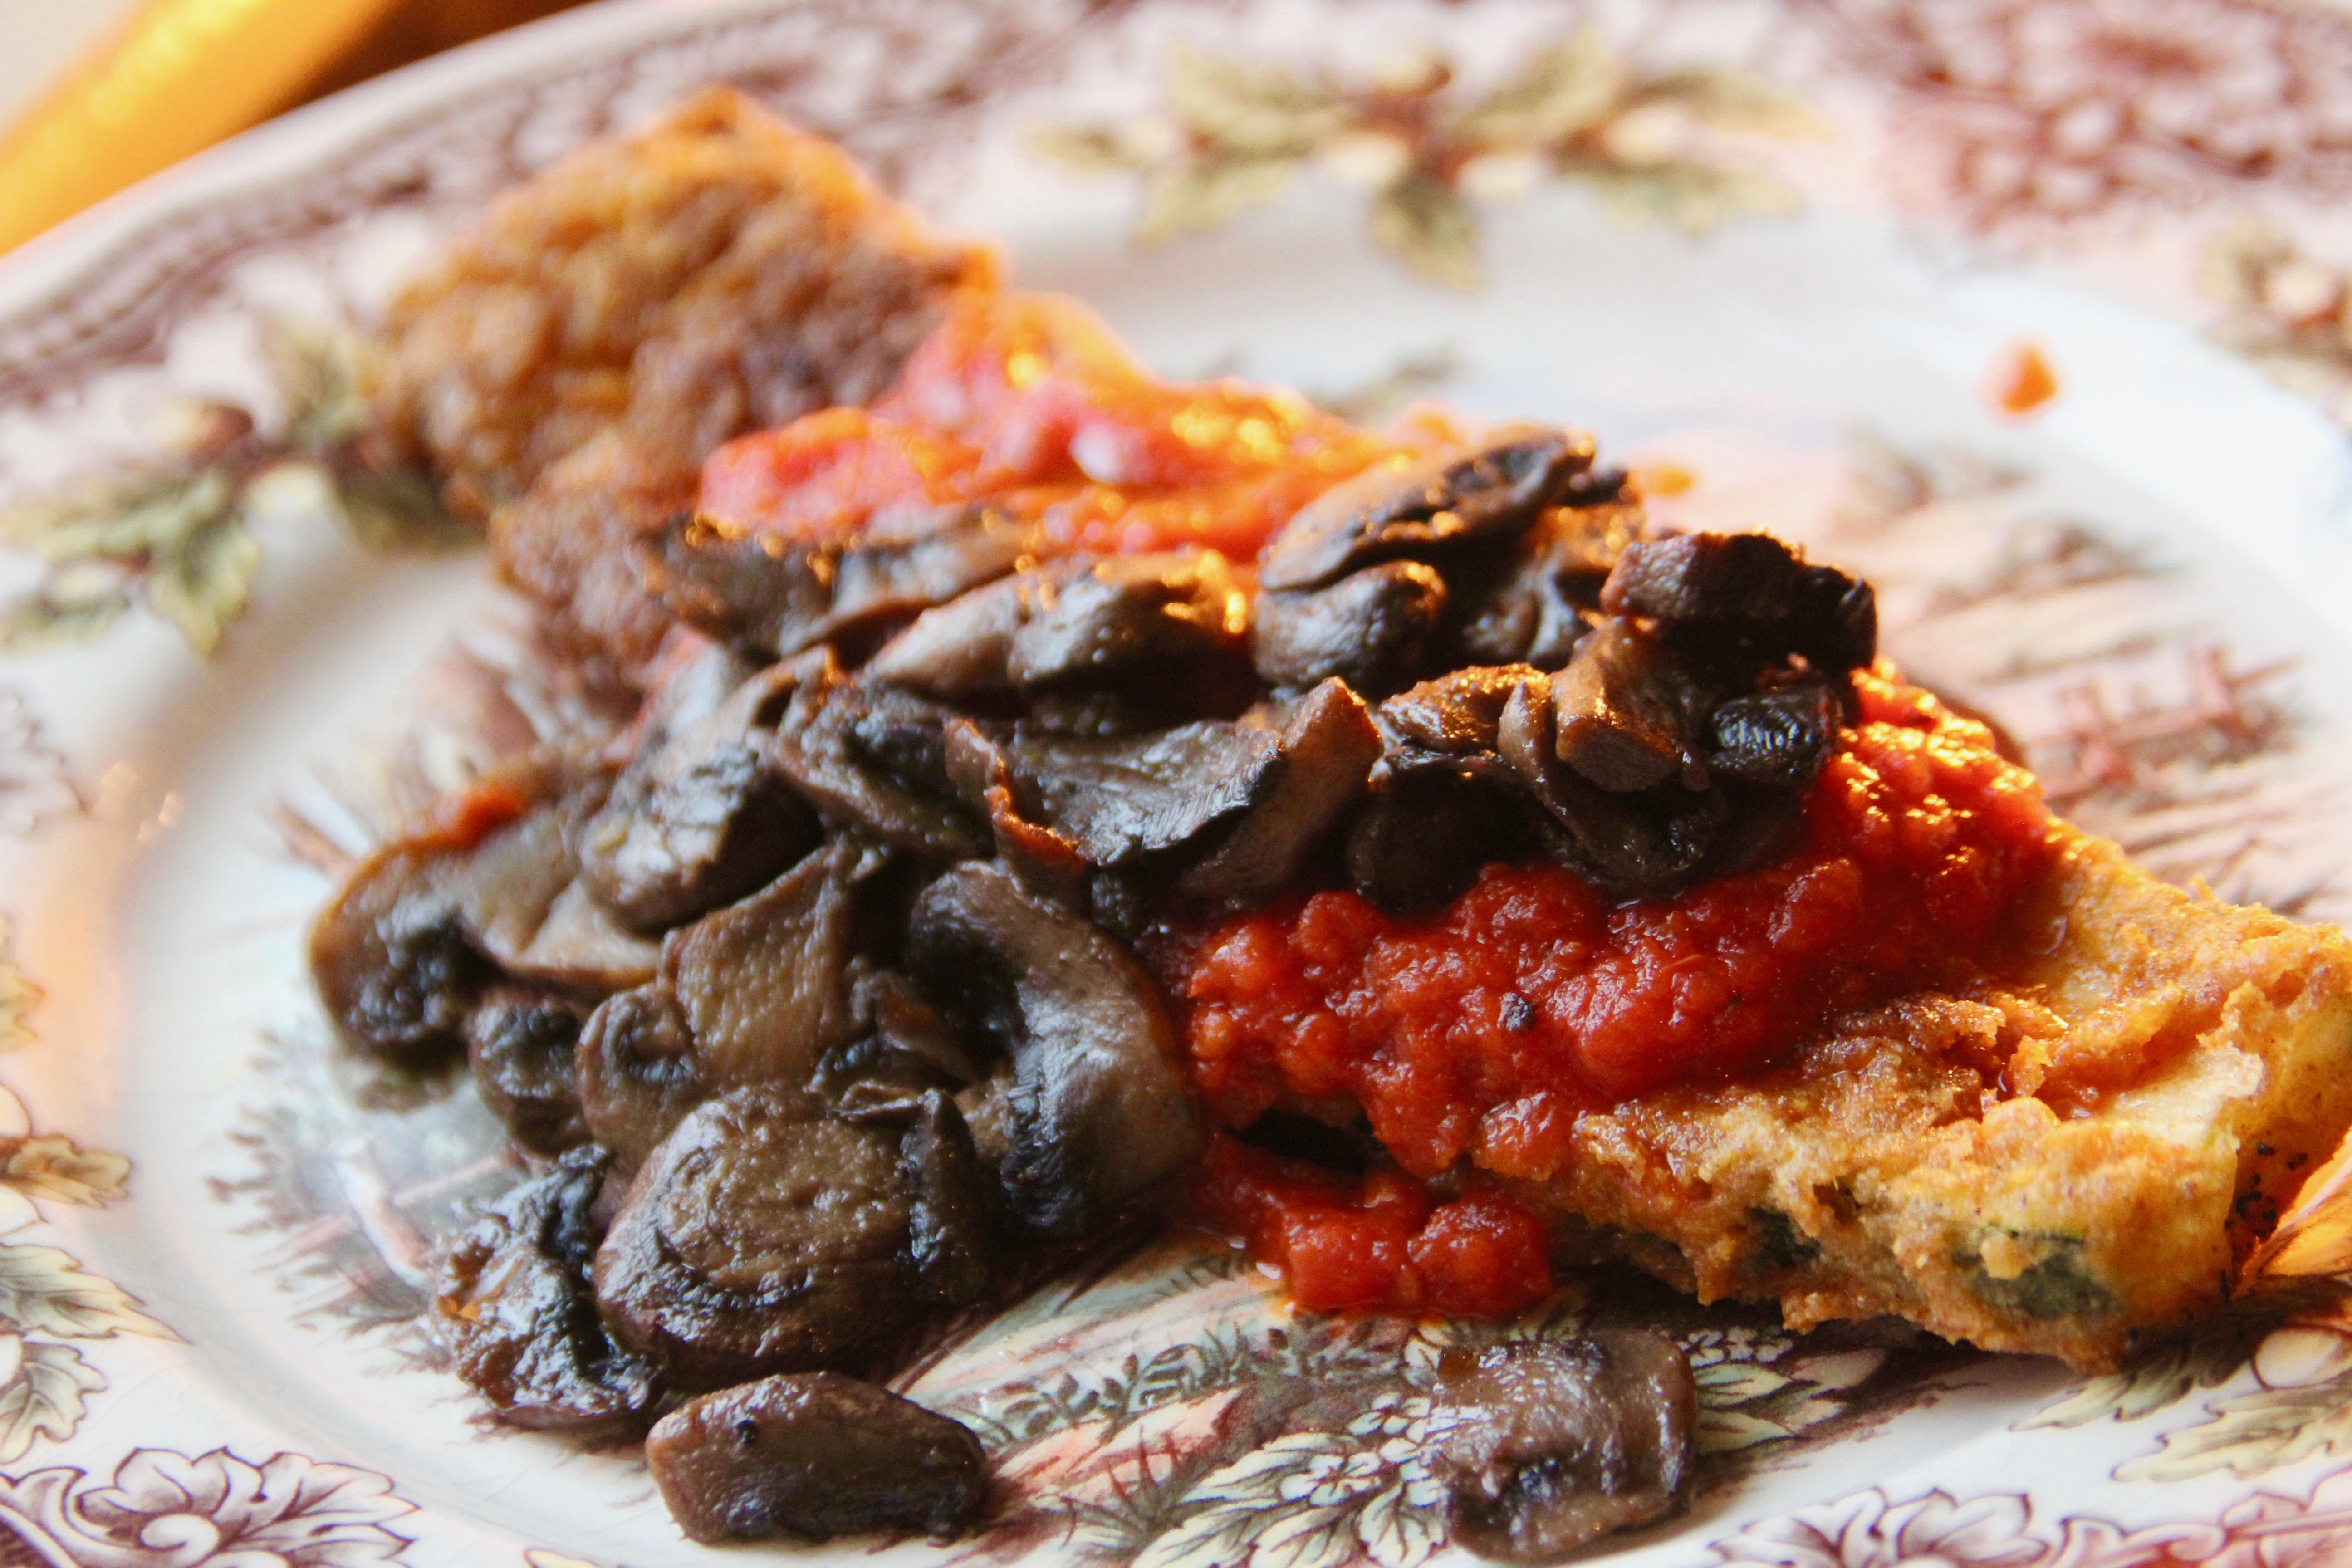 Easy recipe, zucchini, mushrooms, tomato sauce, easy weekday meal, French Cuisine